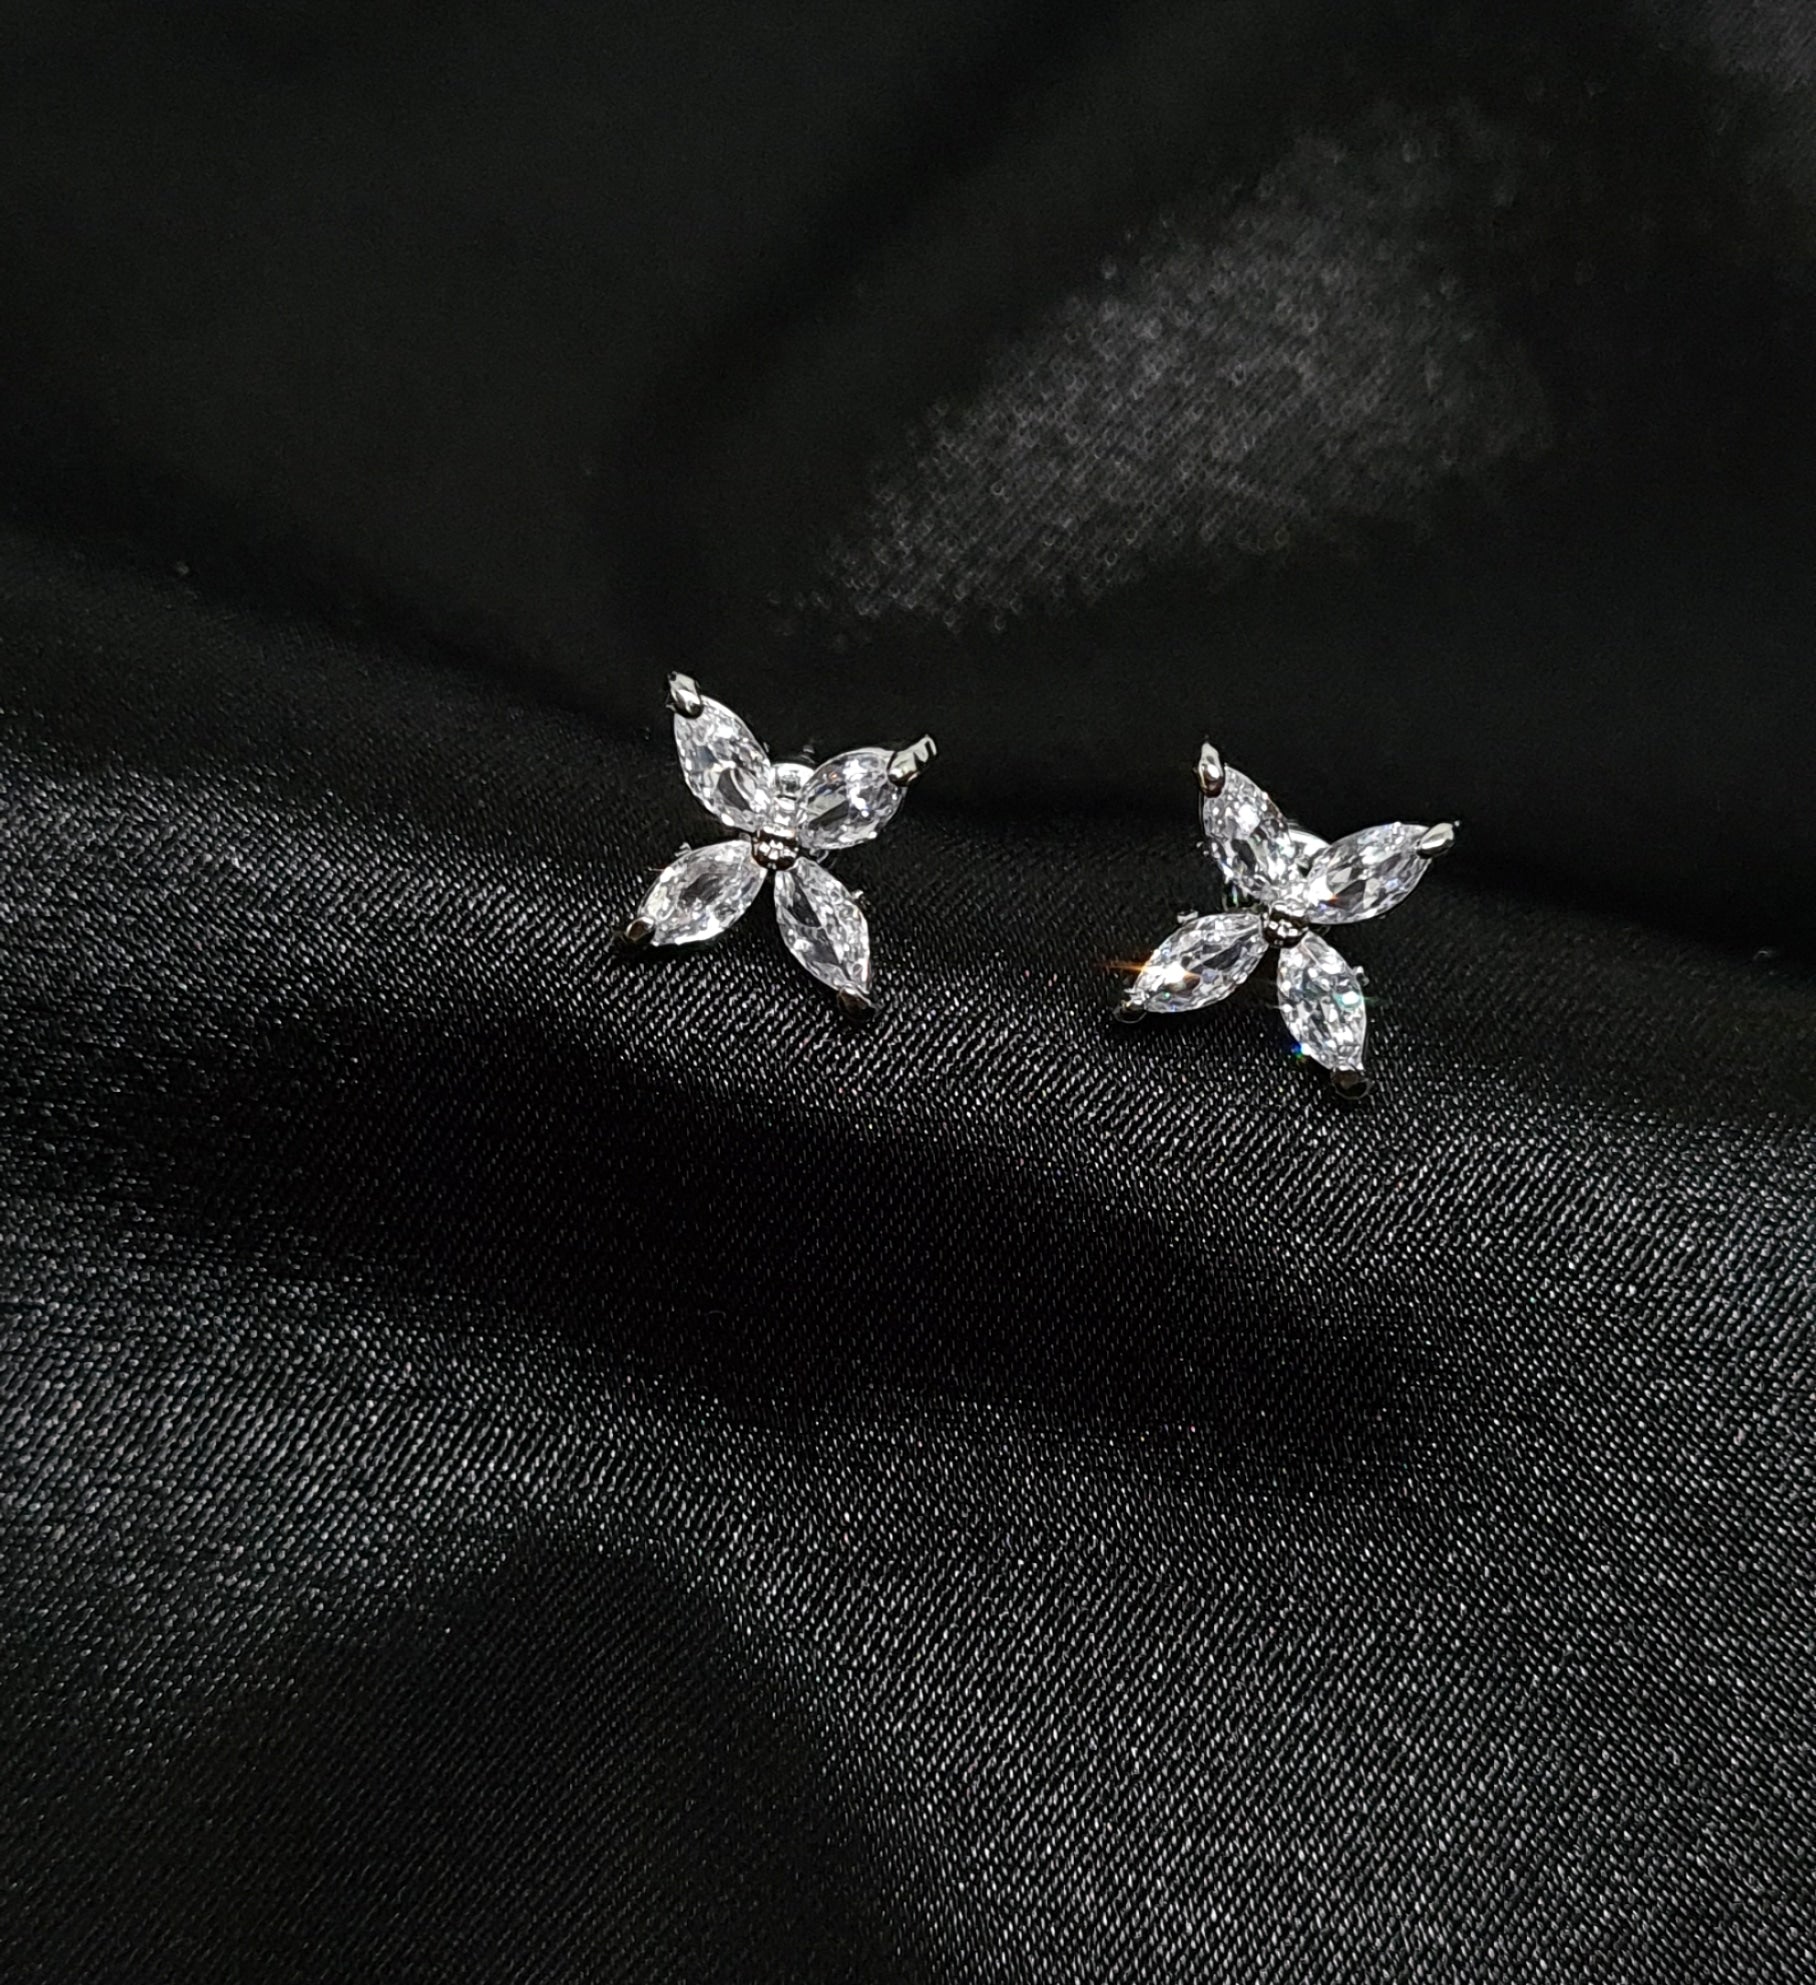 A pair of stud earrings in the shape of a delicate flower, made of cubic zirconia. The earrings are sitting on a black surface. The flower is about 1.2 cm in diameter and is made up of petals that are clear and sparkling. The center of the flower is a small cubic zirconia stone.